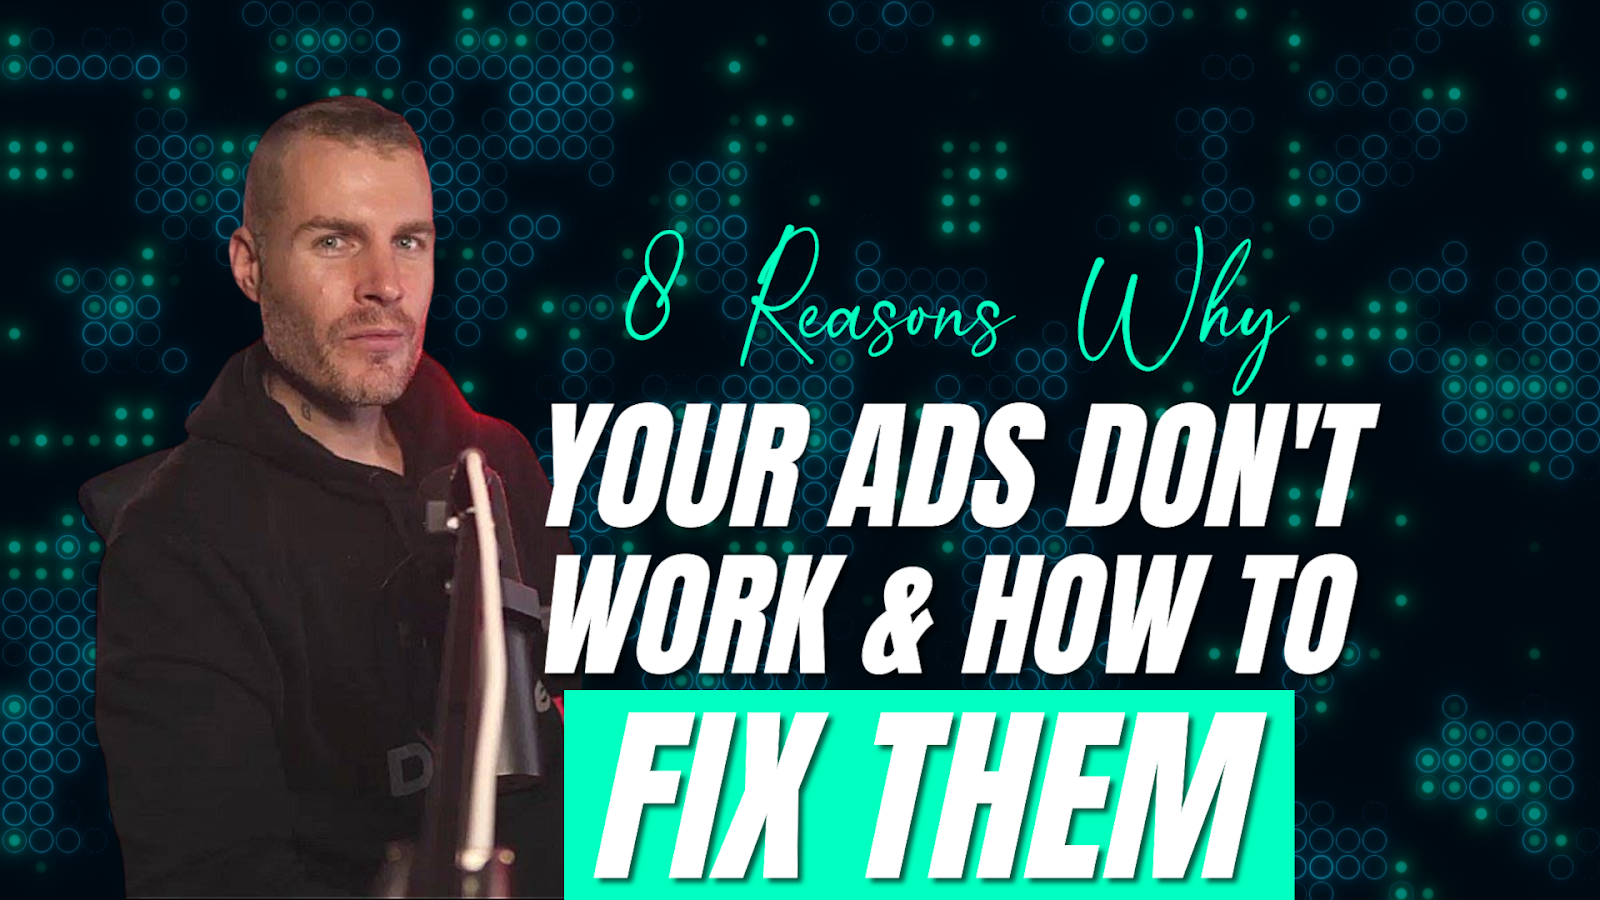 8 Reasons Why Your Ads Don’t Work & How to Fix Them